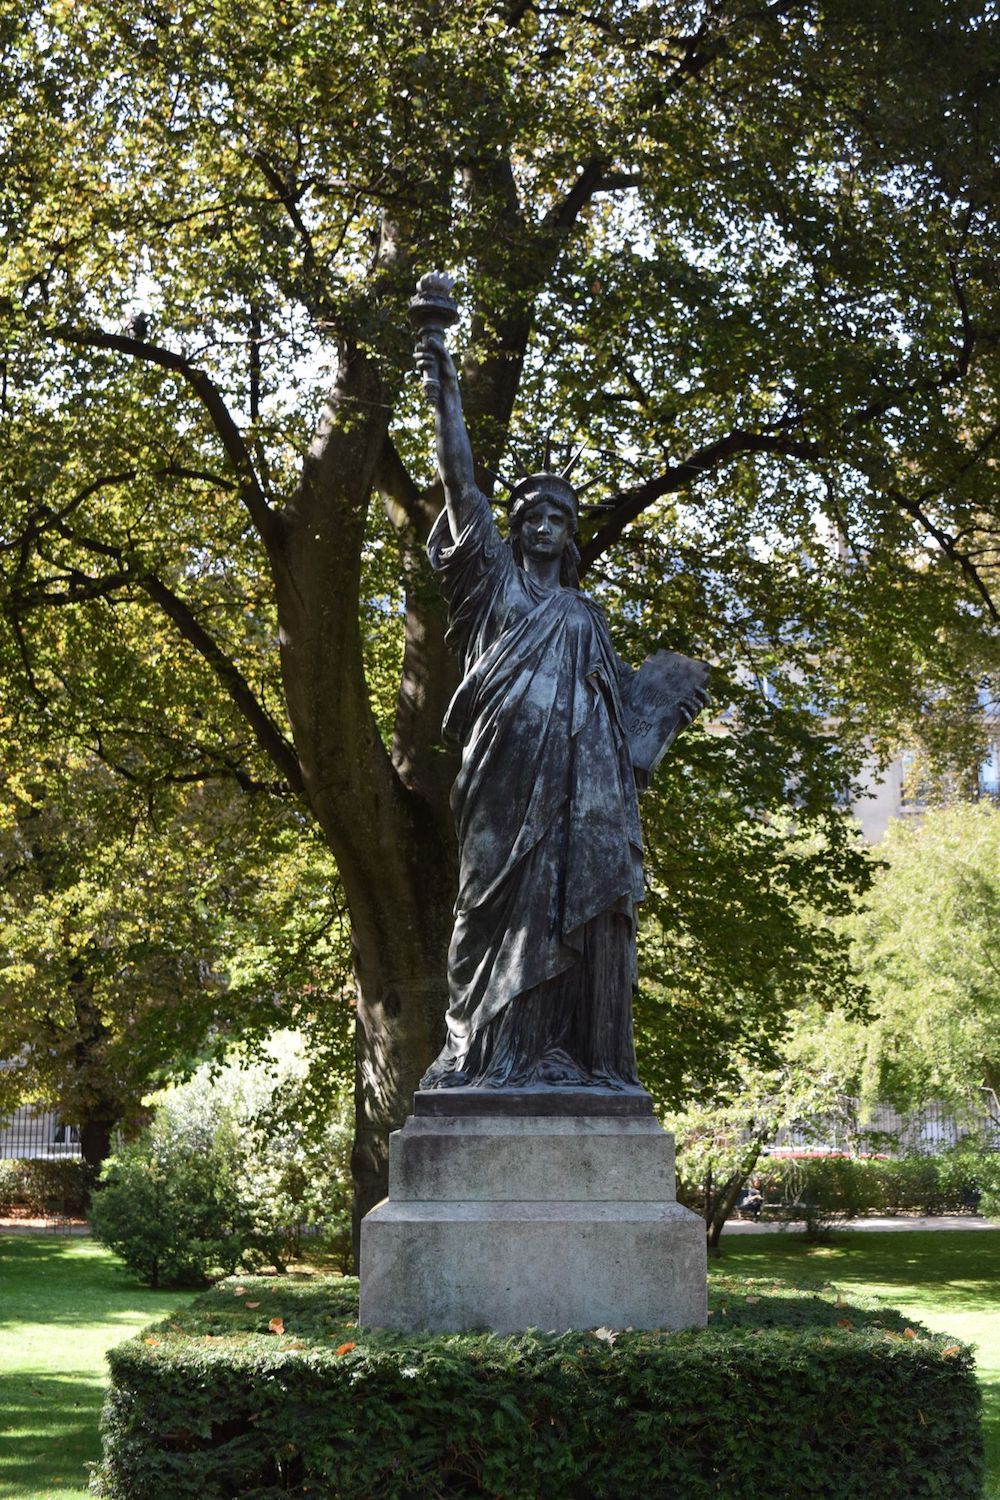 See the Statue of Liberty in the Jardin Du Luxembourg, Paris